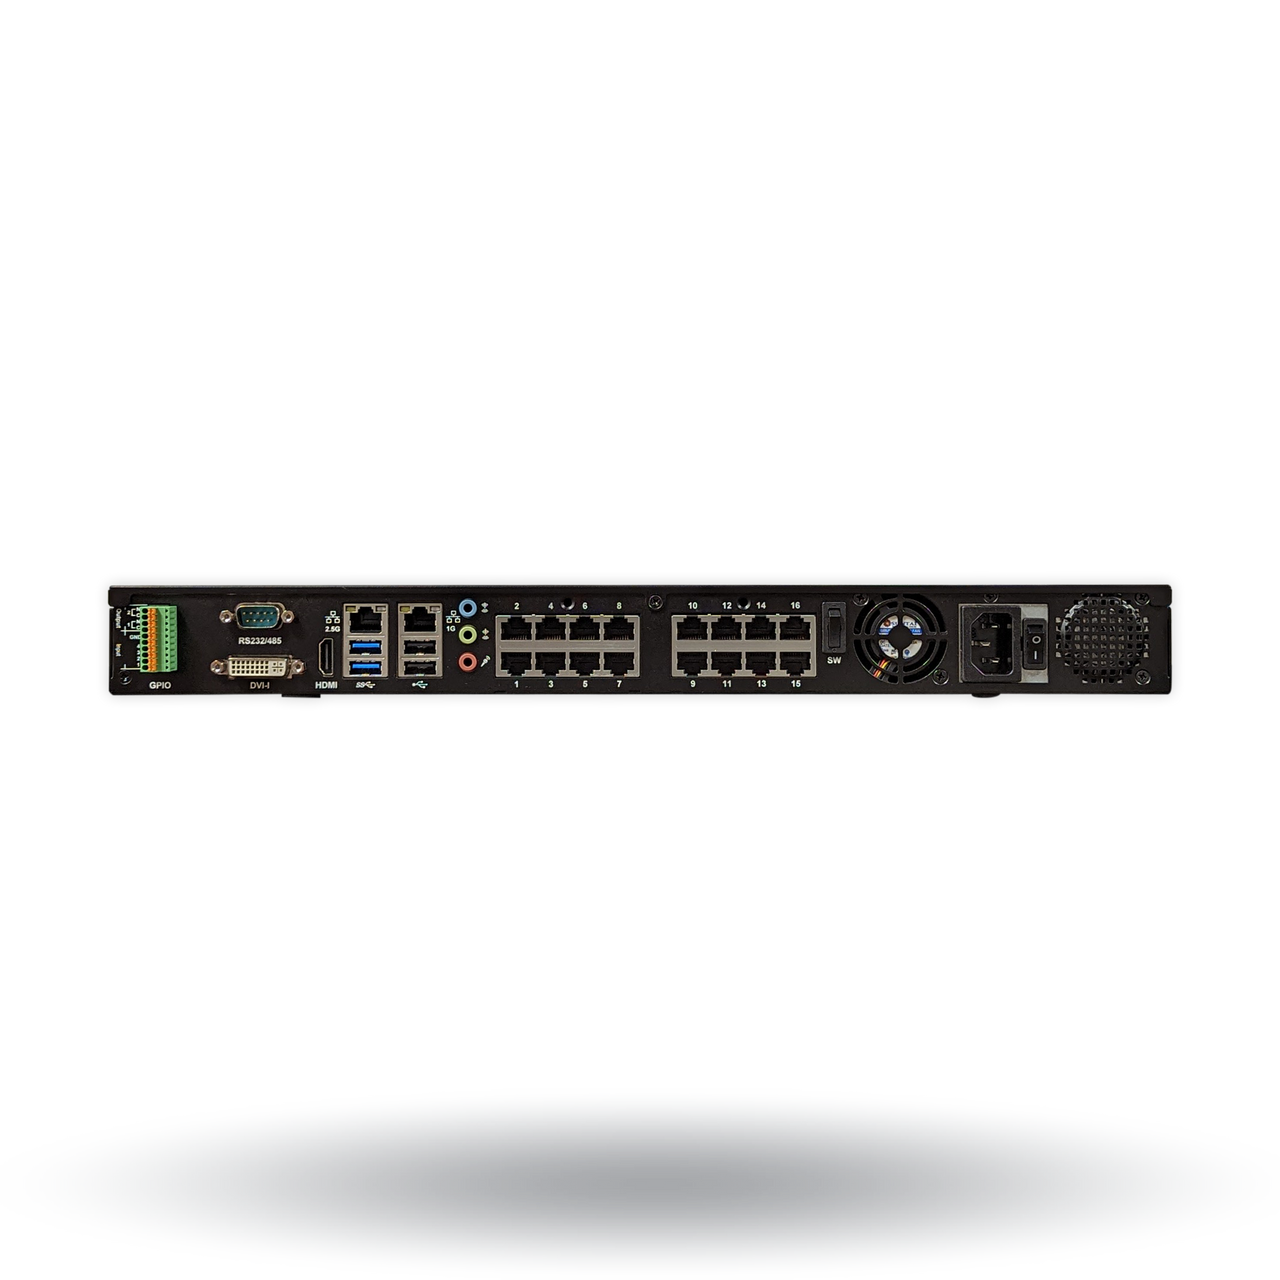 Digital Watchdog DW-BJCX24T-LX 24-Channel 80Mbps NVR with 16 PoE Ports, 24TB HDD